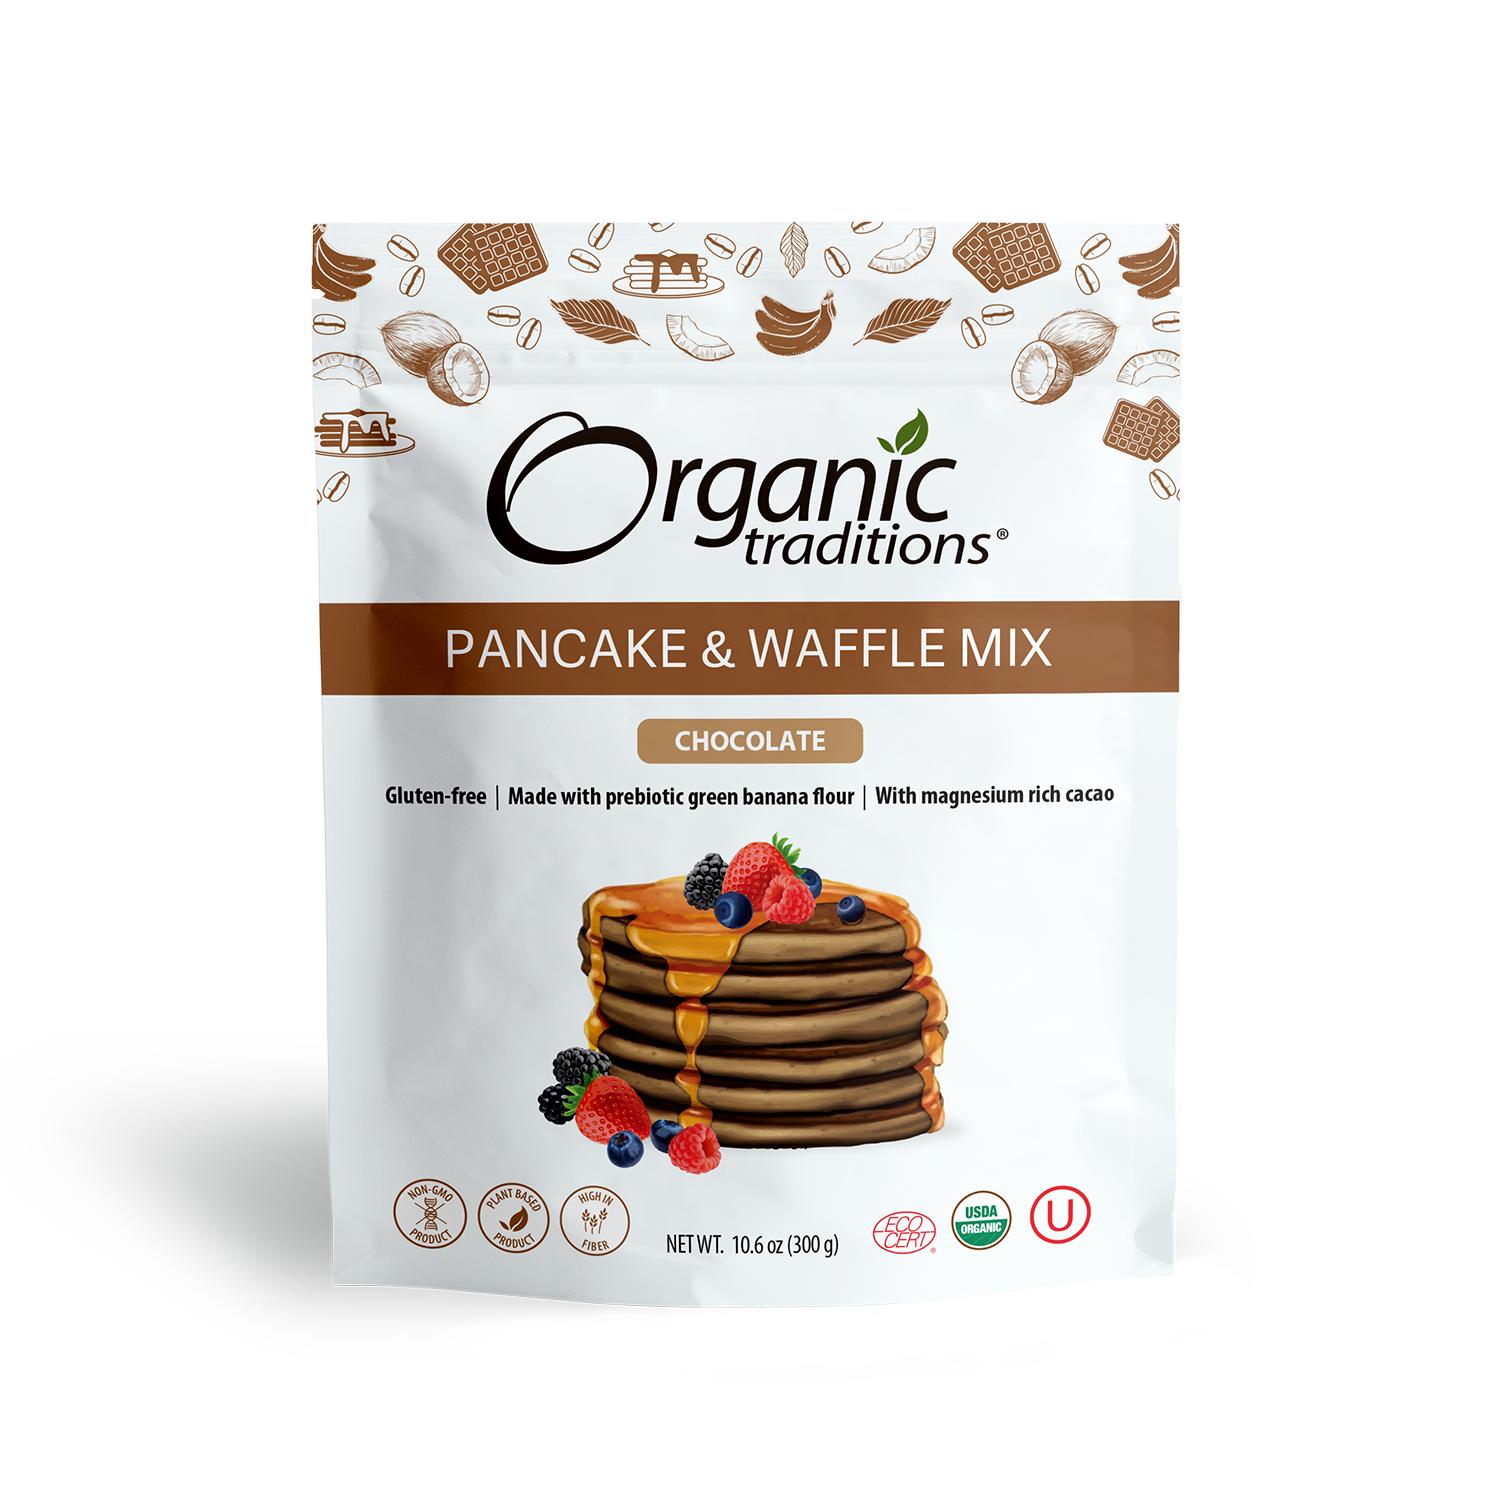 organic traditions chocolate pancake and waffle mix front of bag image